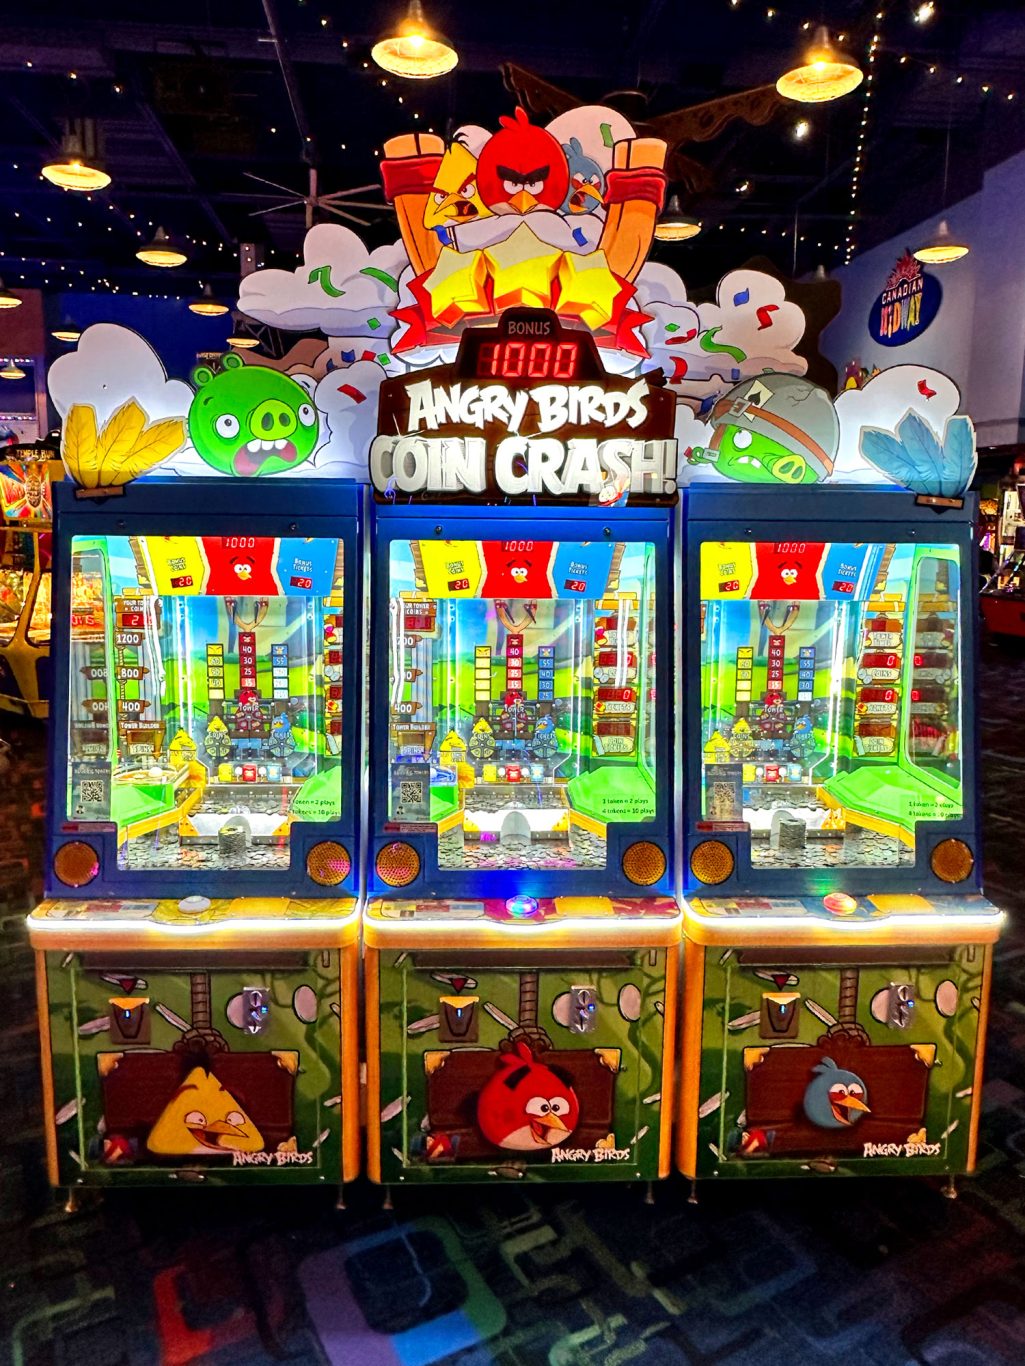 Angry Birds Coin Crash game inside the Great Canadian Midway